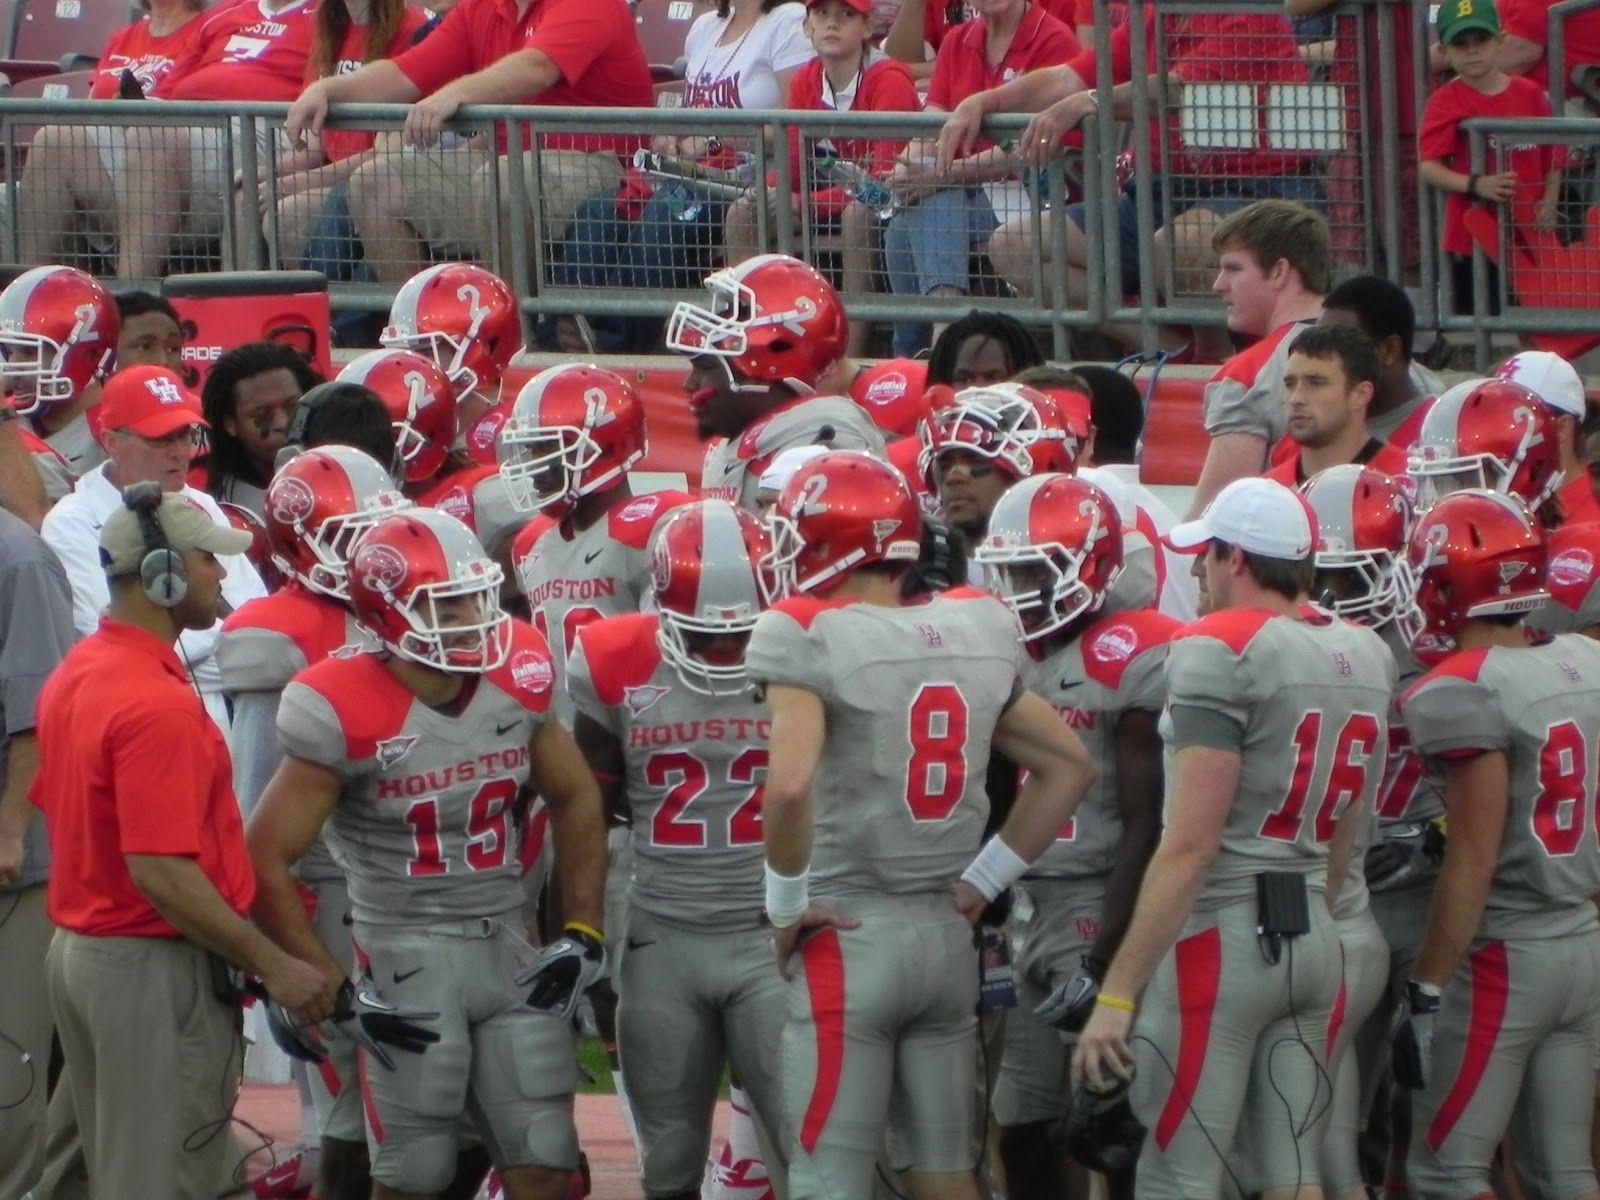 Cool Cougars Logo - Mean Green Cougar Red: Coogs wear cool uniforms but lose to Tulsa, 41-7